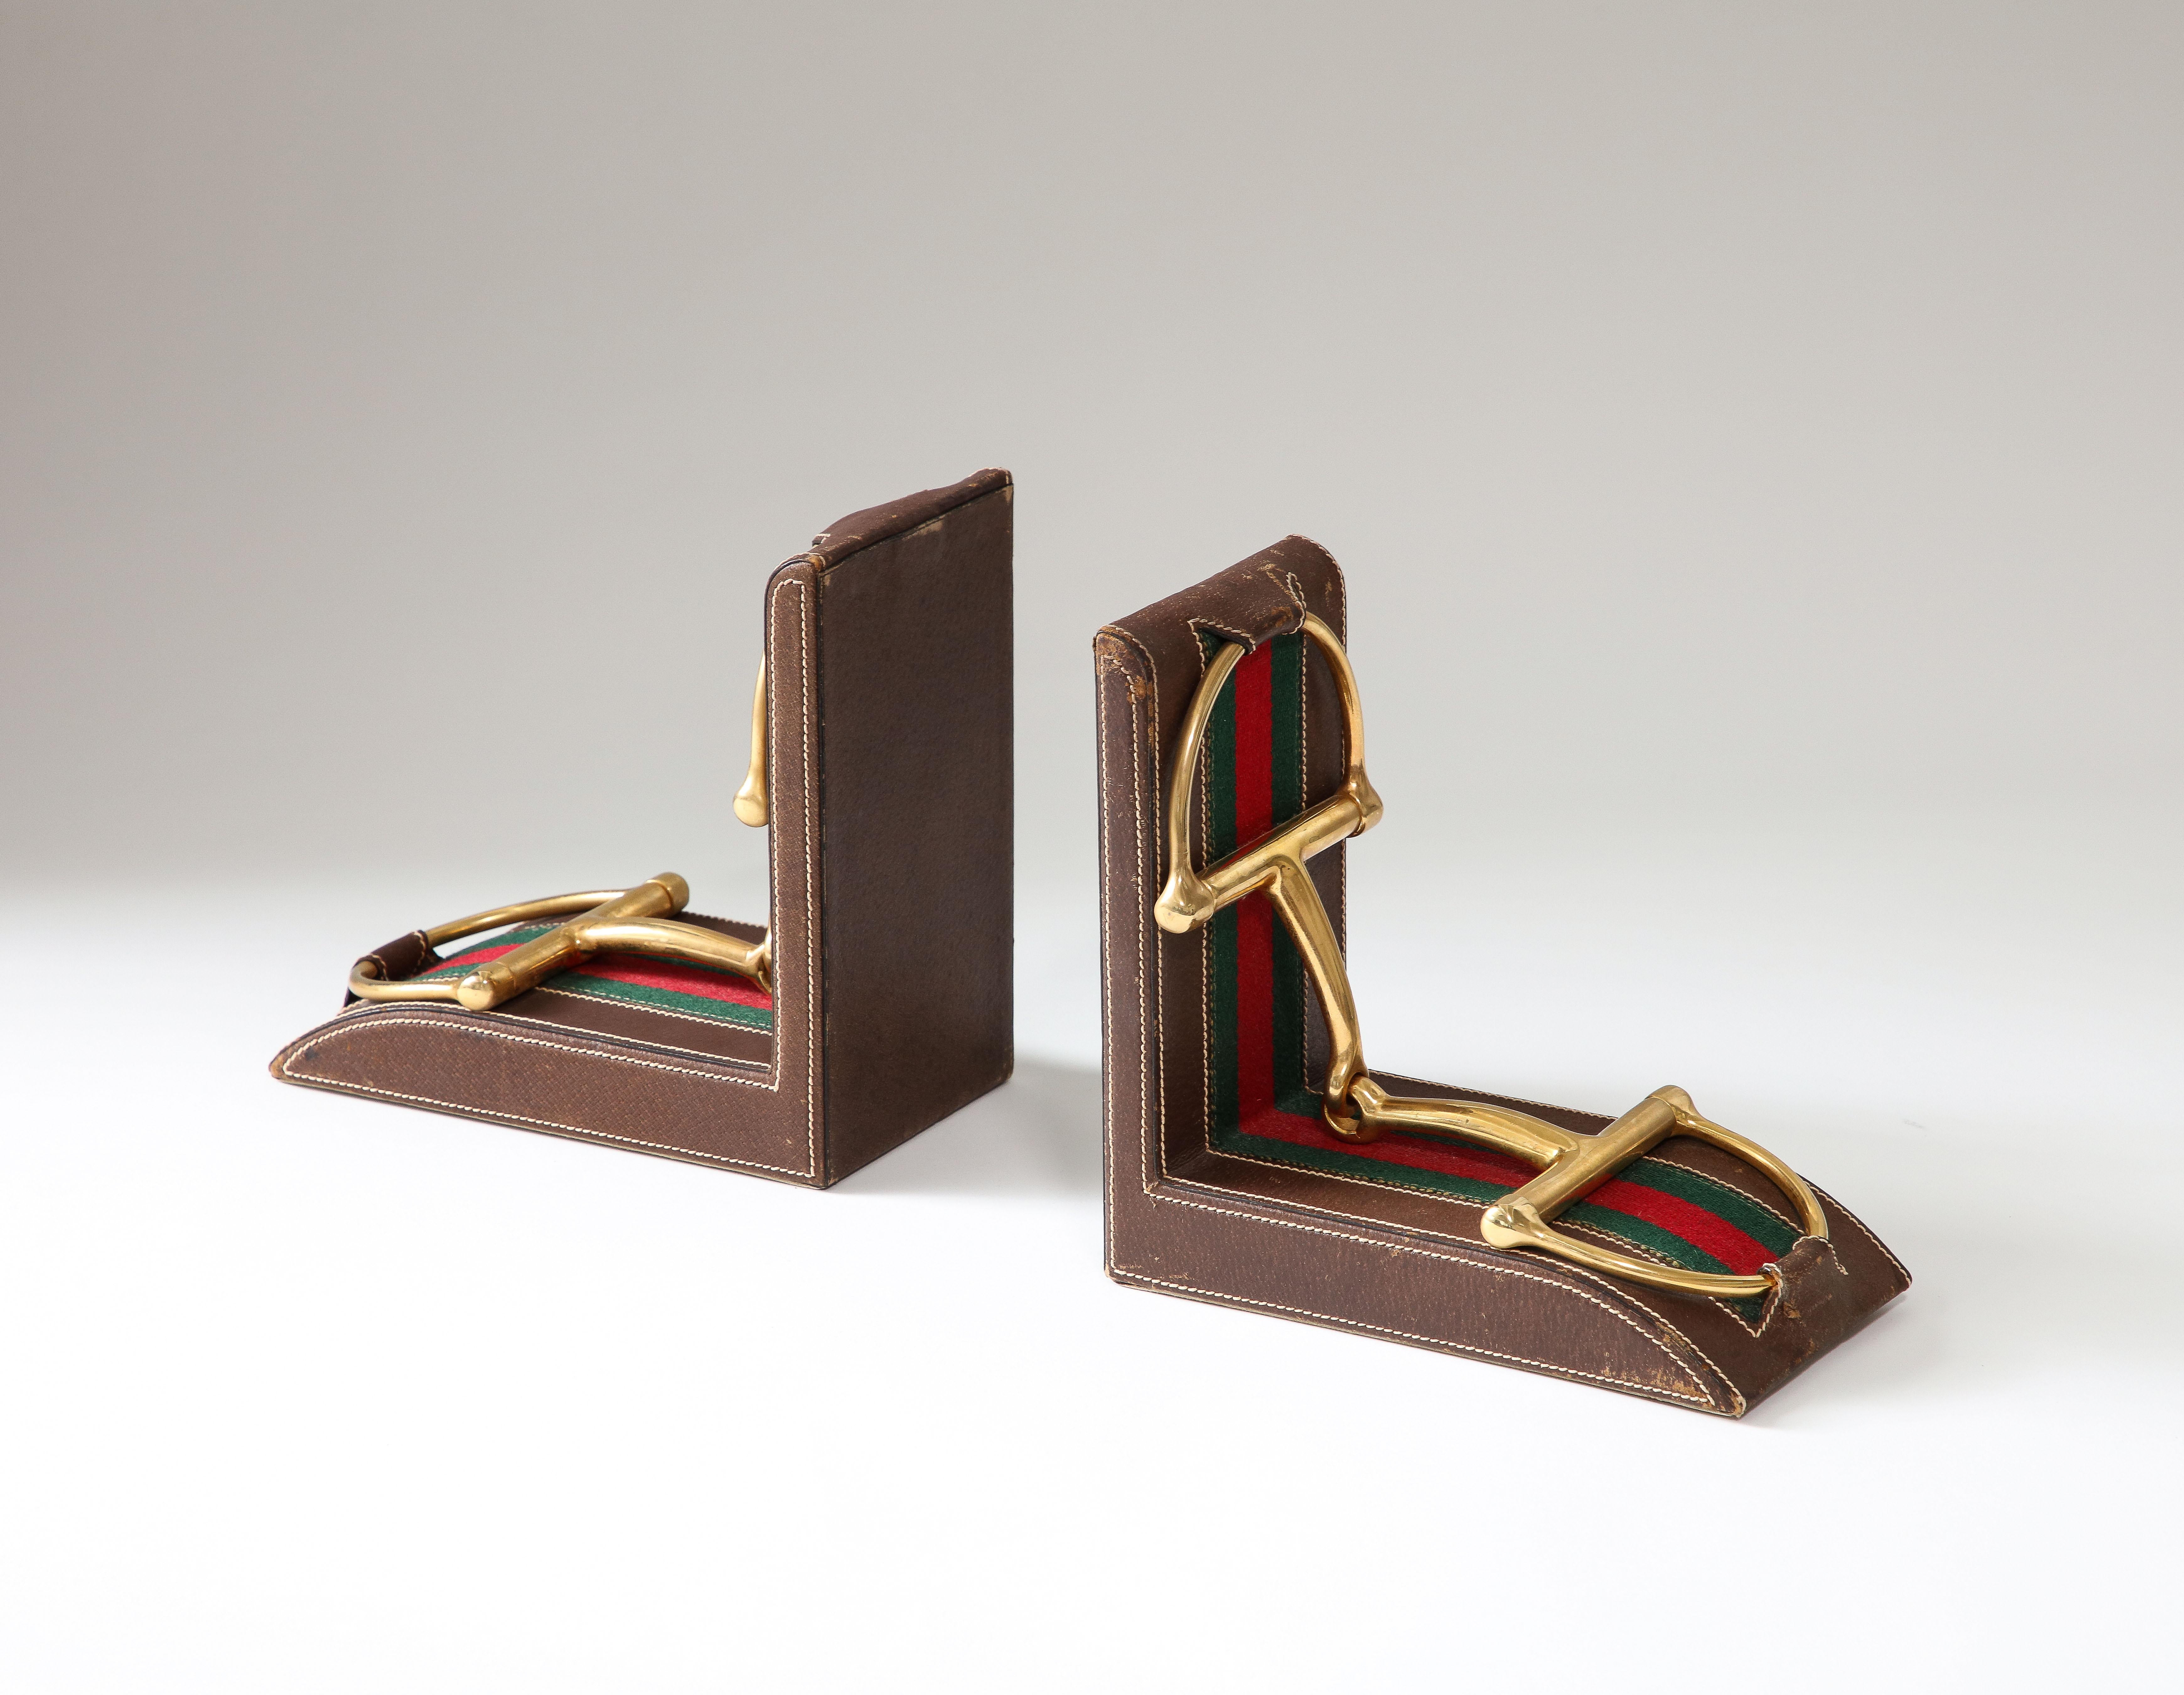 Pair of Leather and Brass Bookends, Gucci, Italy, c. 1970 For Sale 5